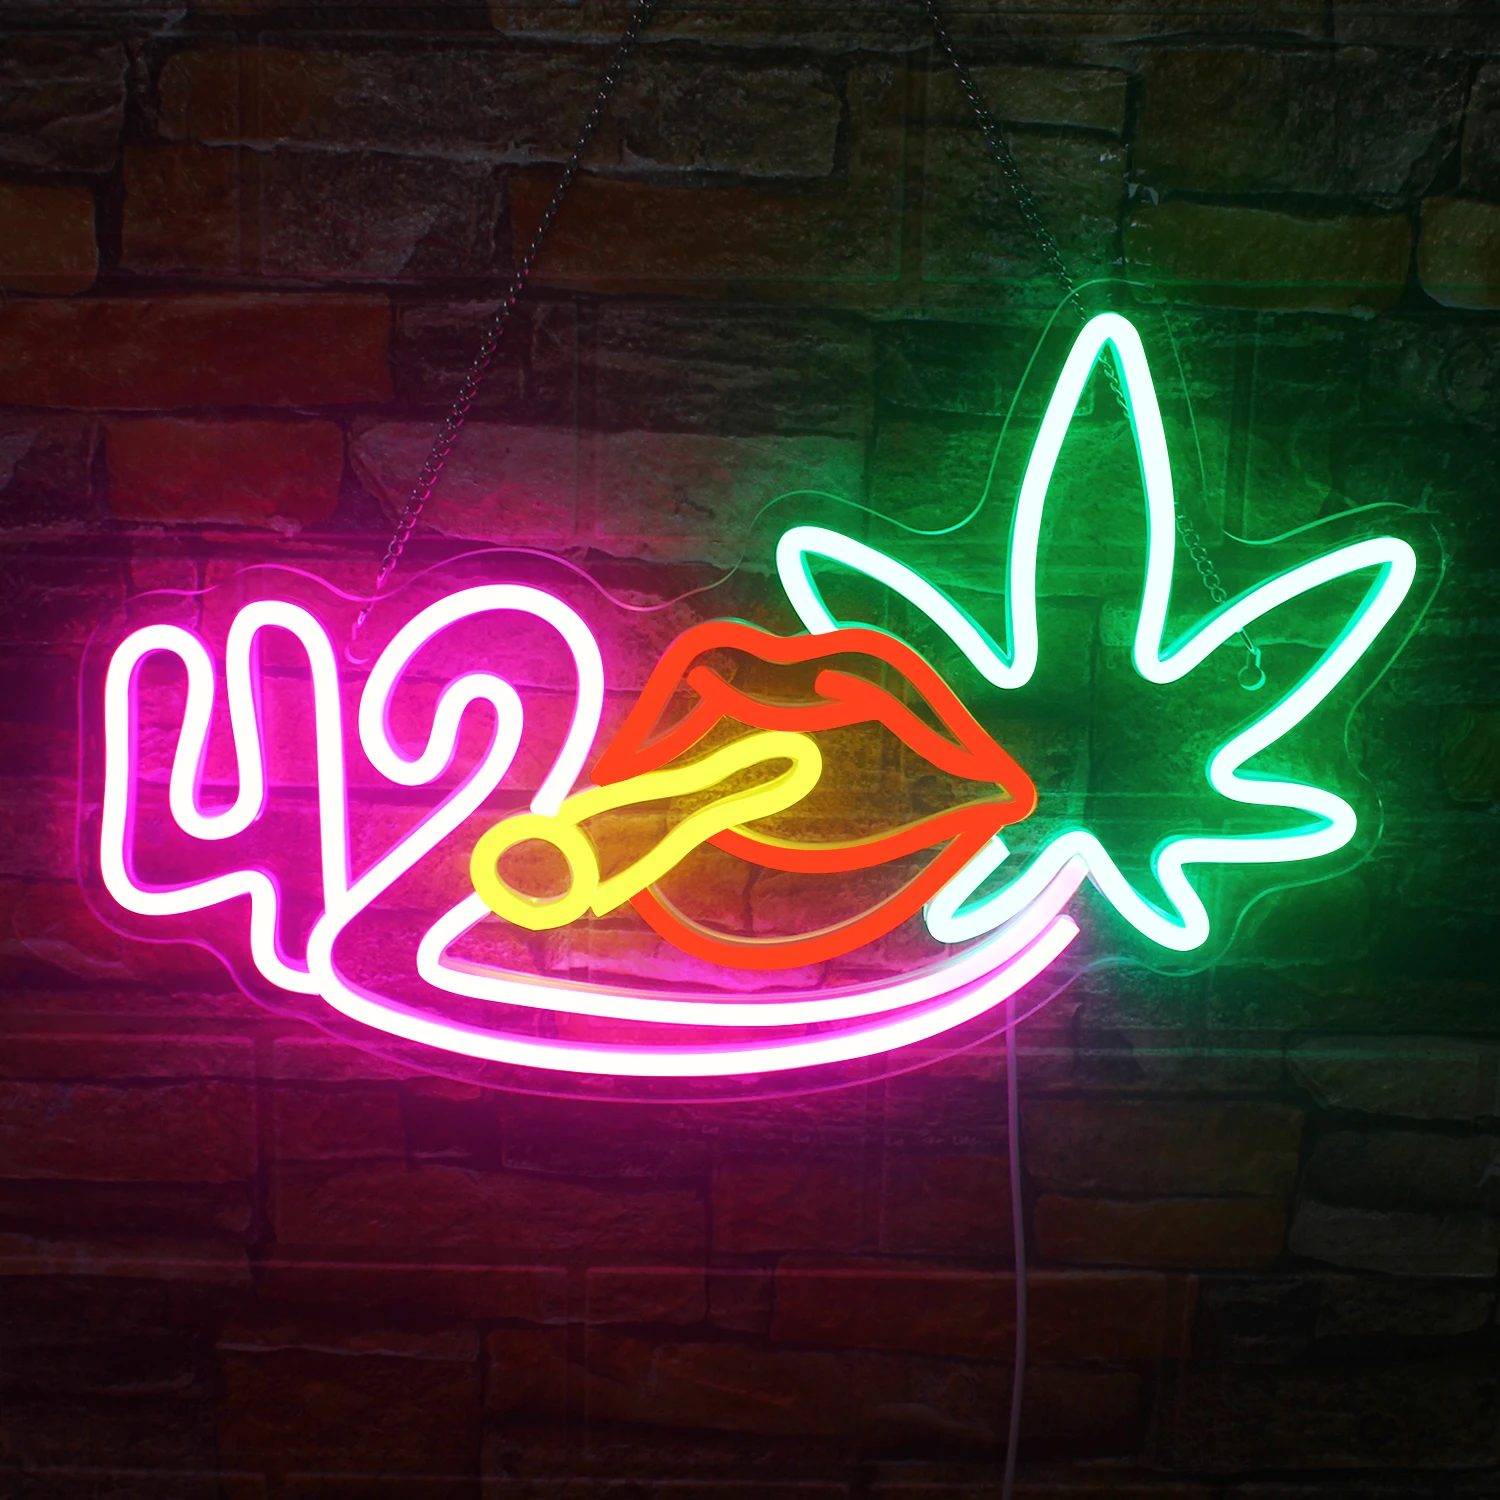 

Leaf Neon Sign Green Leaf Neon Lights Signs for Wall Decor Neon Light LED Signs for Cigar Beer Bar Man Cave Club Pub Party Decor